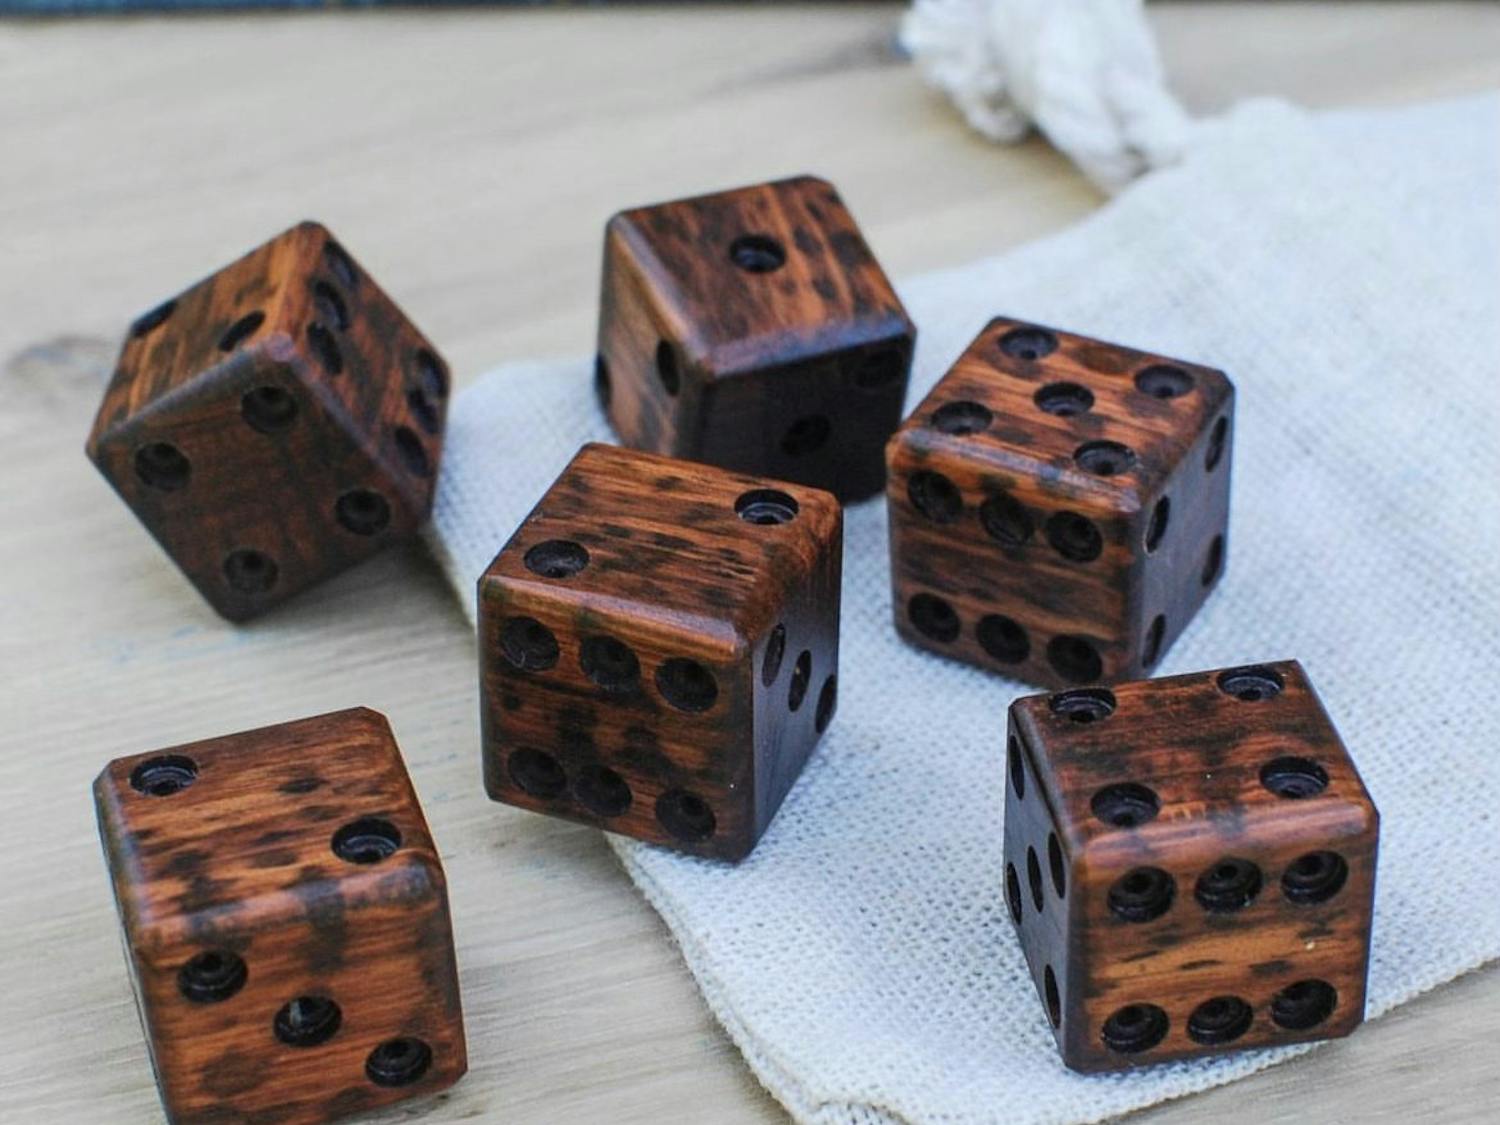 Dice made by Arnold Schweiner, 75-year-old founder of Dice by Arnold. ﻿